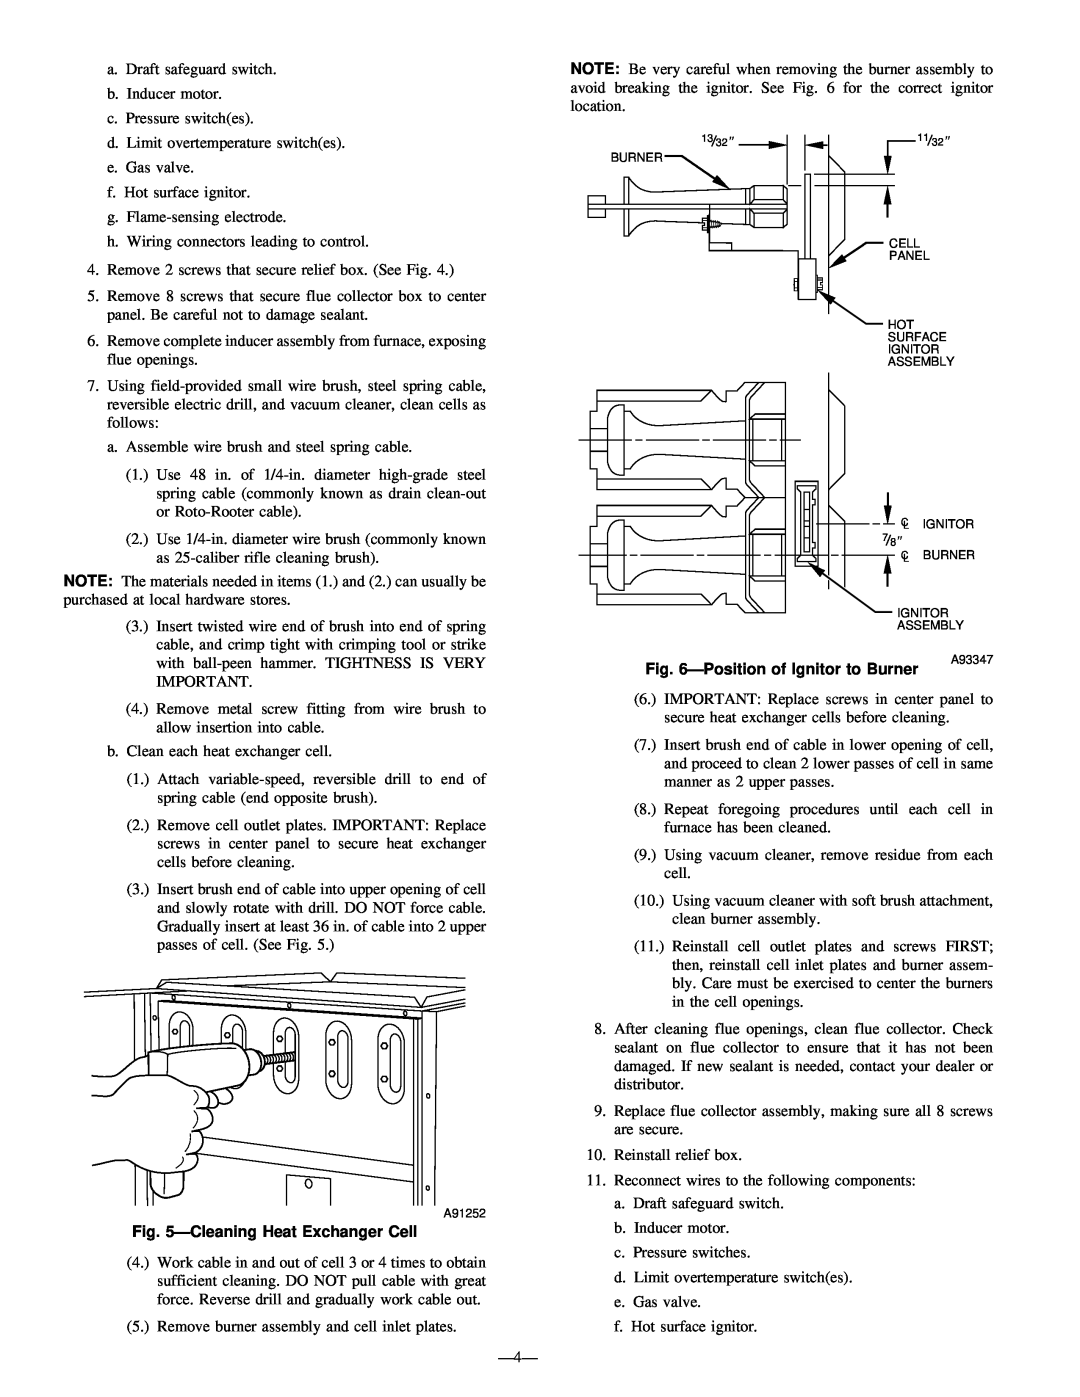 Bryant 333BAV instruction manual ÐPosition of Ignitor to Burner, ÐCleaning Heat Exchanger Cell 